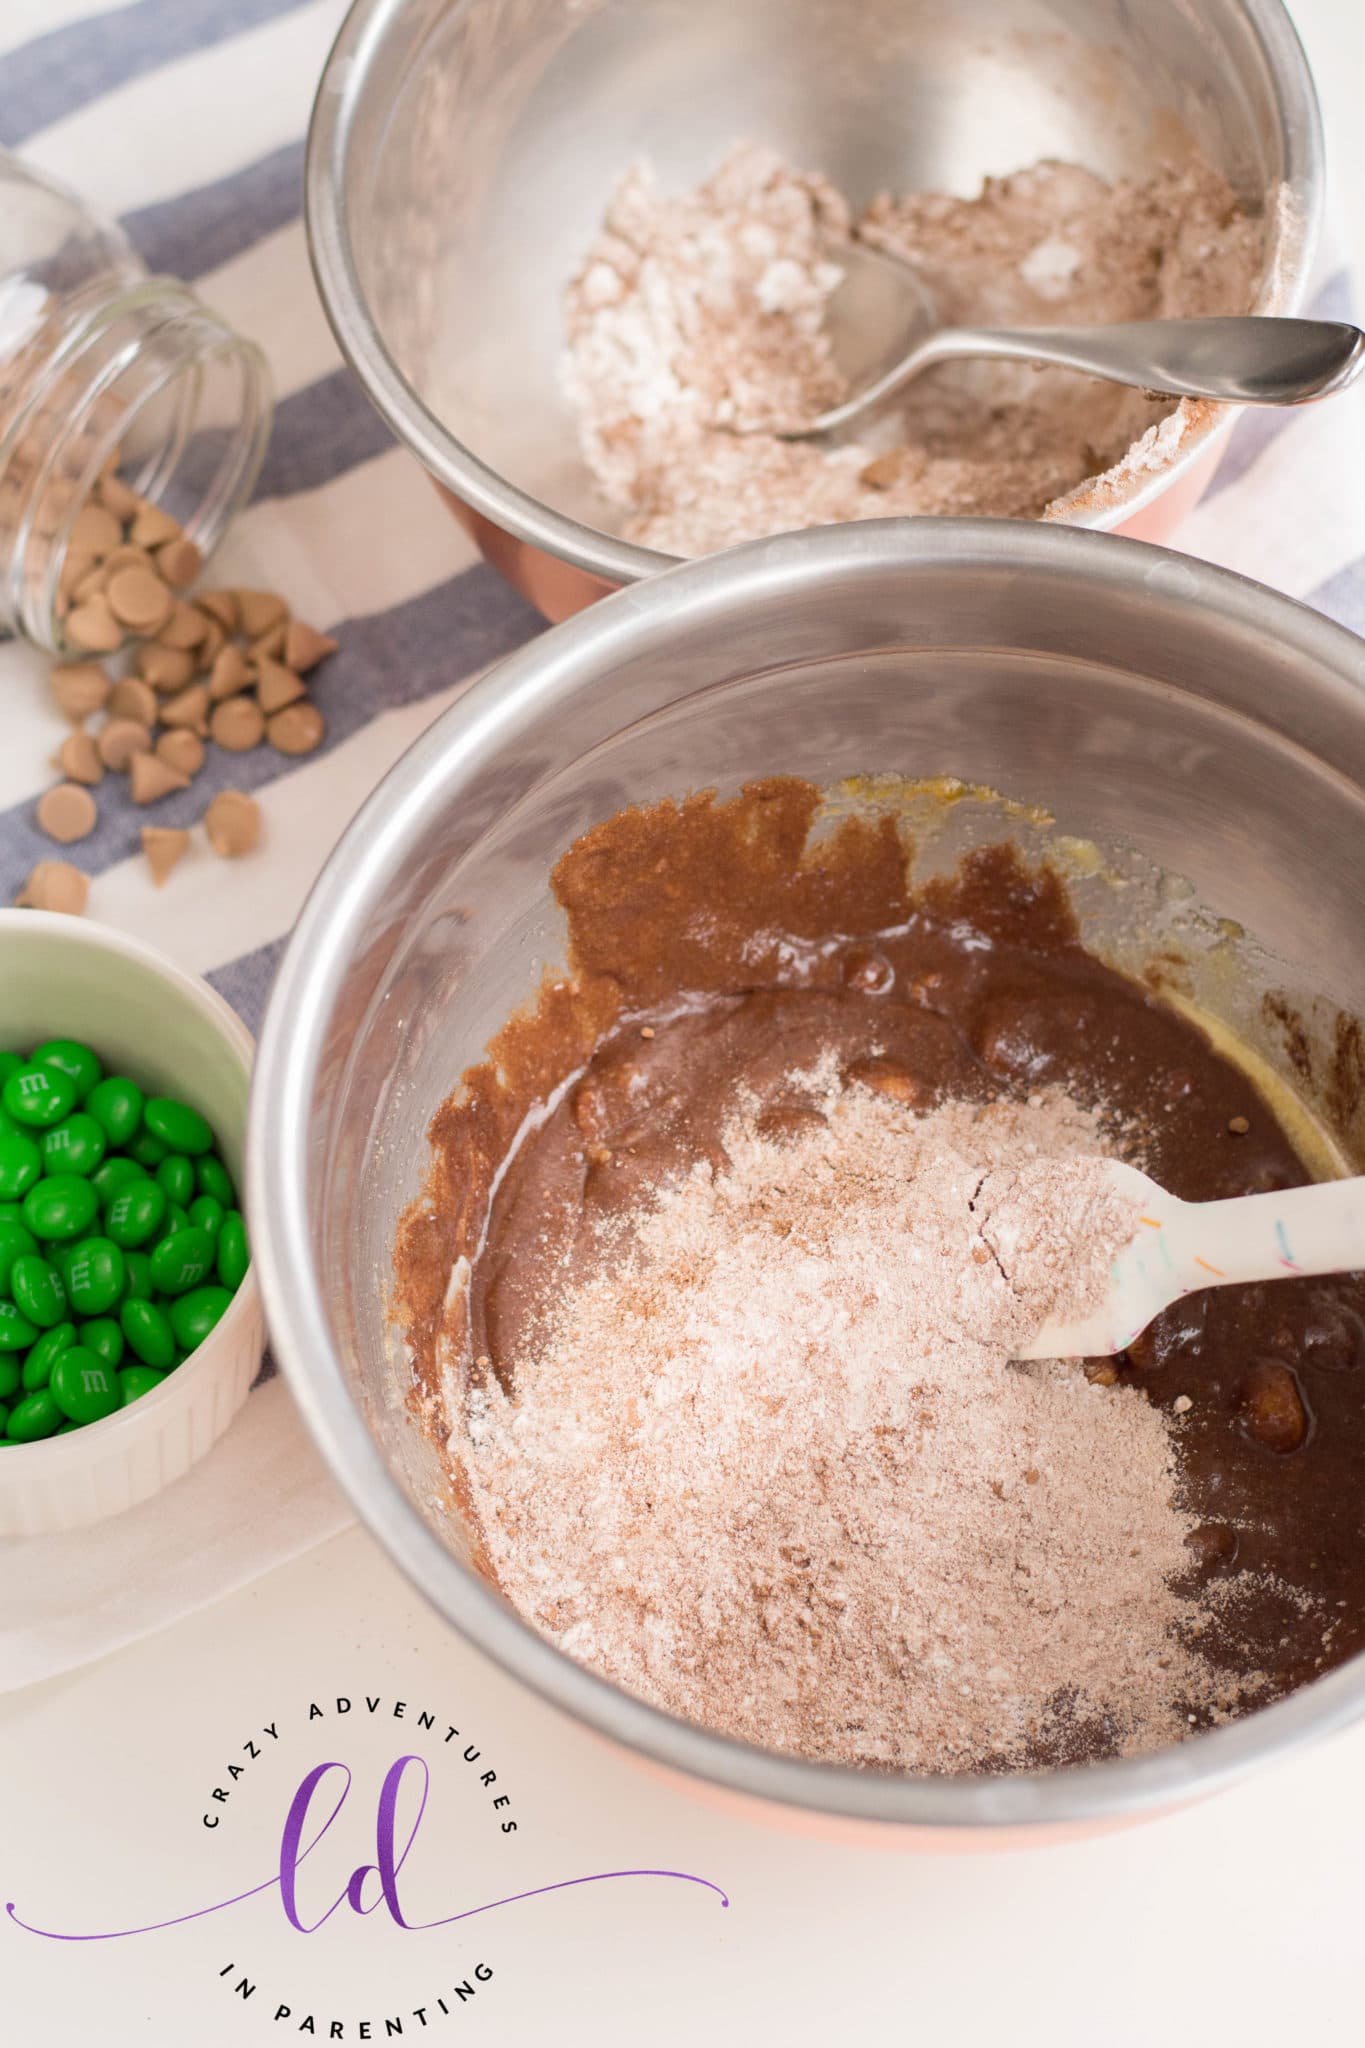 Mix Wet Ingredients with Dry Ingredients to Make St Patricks Day Chocolate Cookies